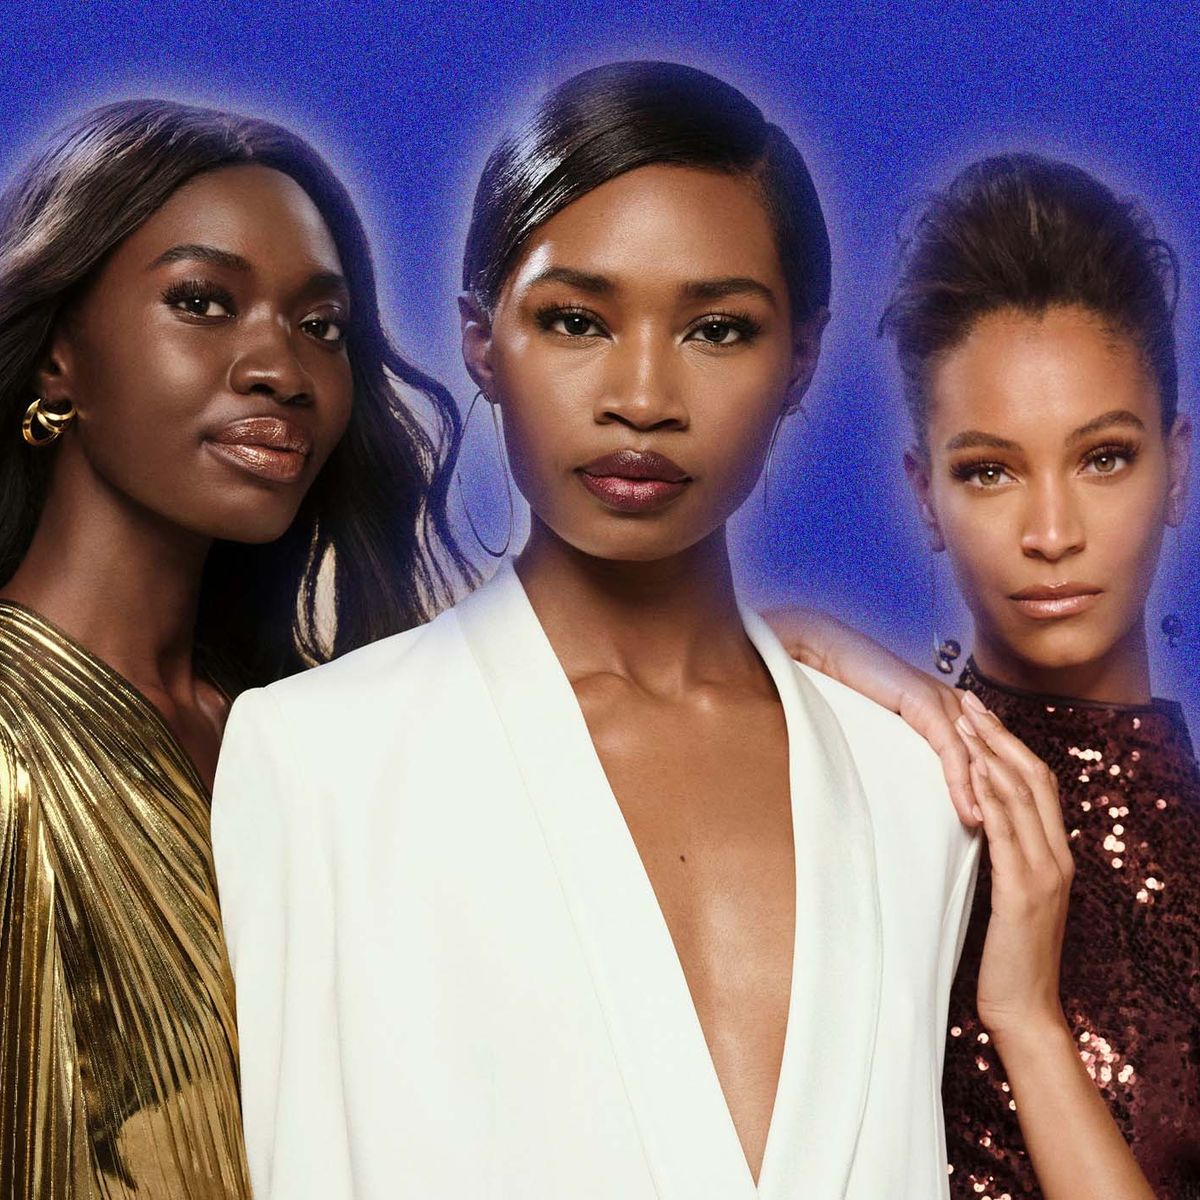 fashion fair execs reveal new plans for iconic brand in hbo’s ‘the beauty of blackness’